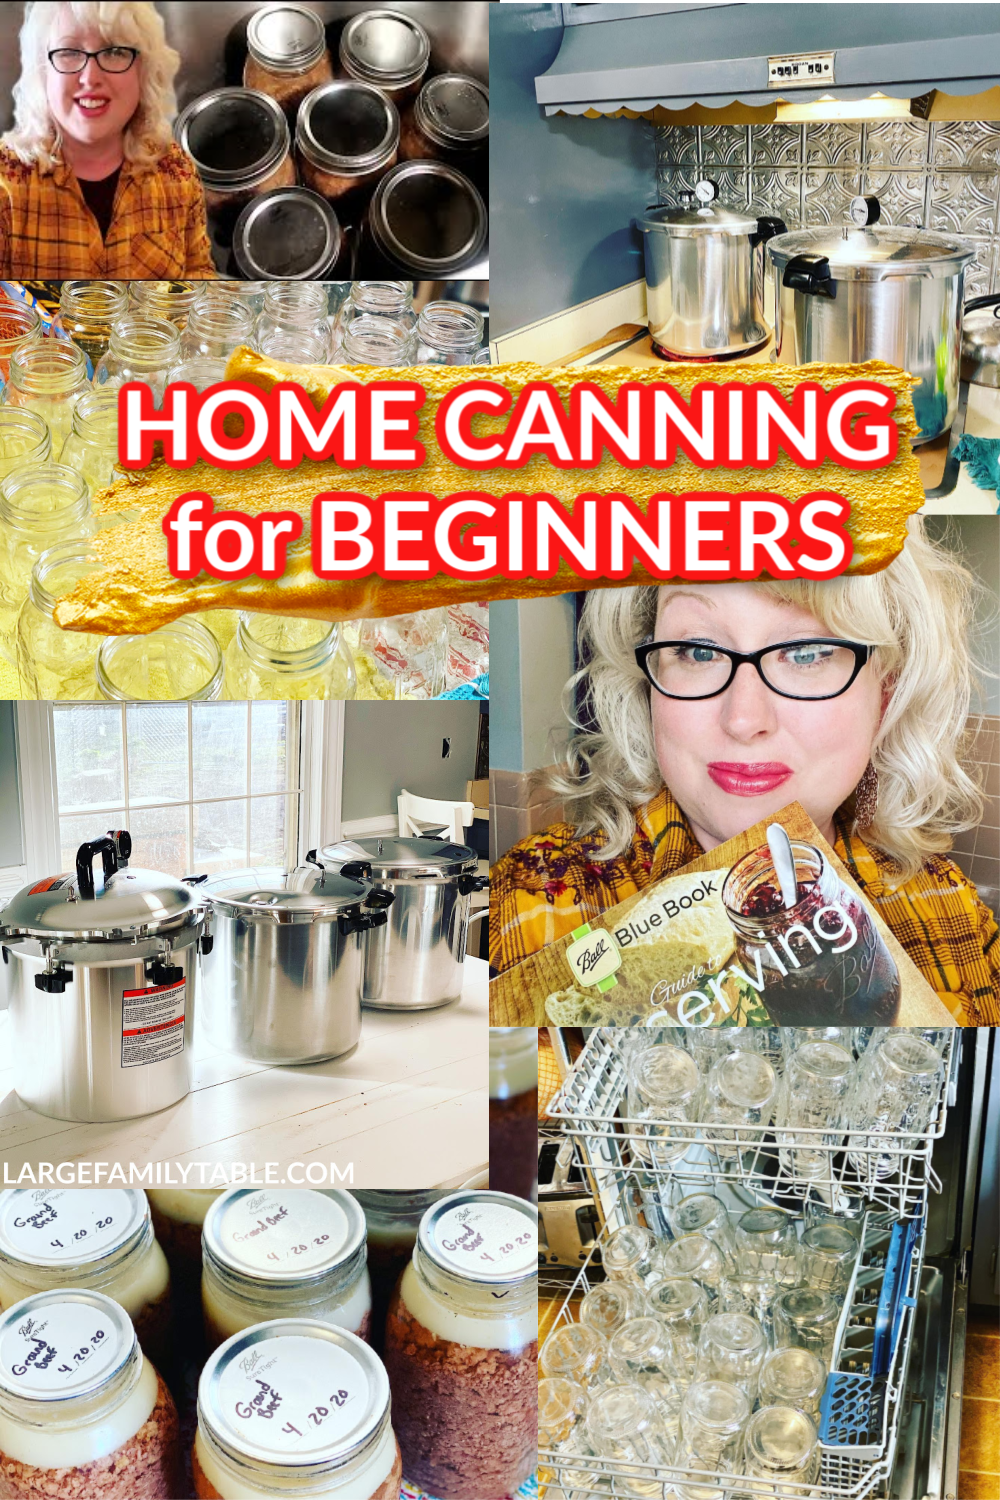 https://largefamilytable.com/wp-content/uploads/2020/05/home-canning-for-beginners-1.png